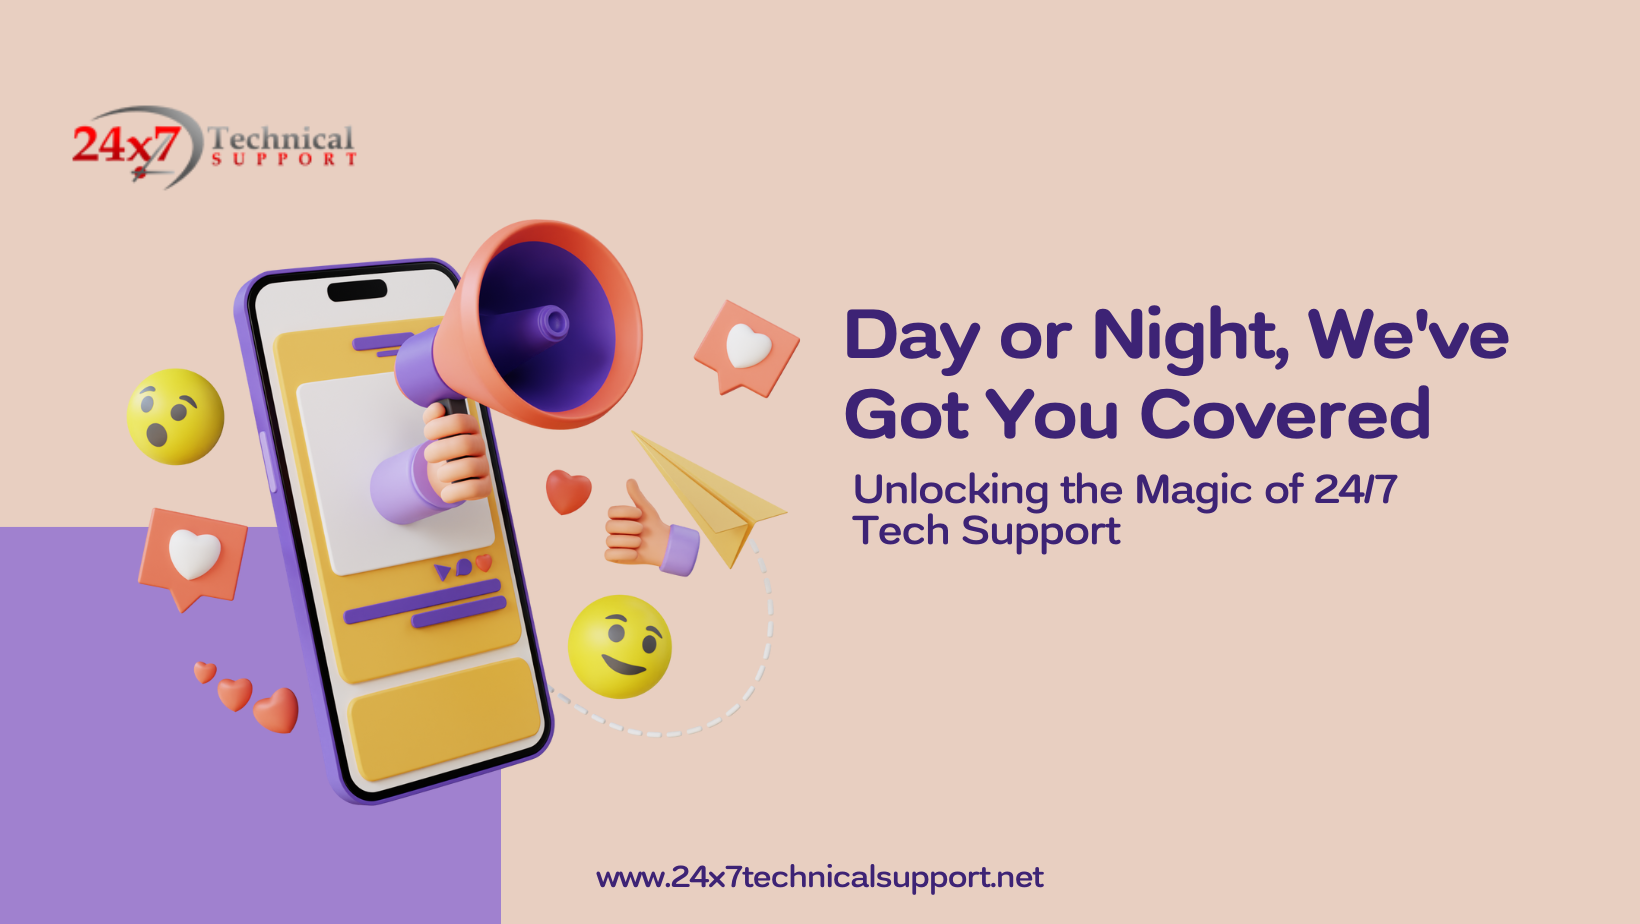 24x7 technical Support